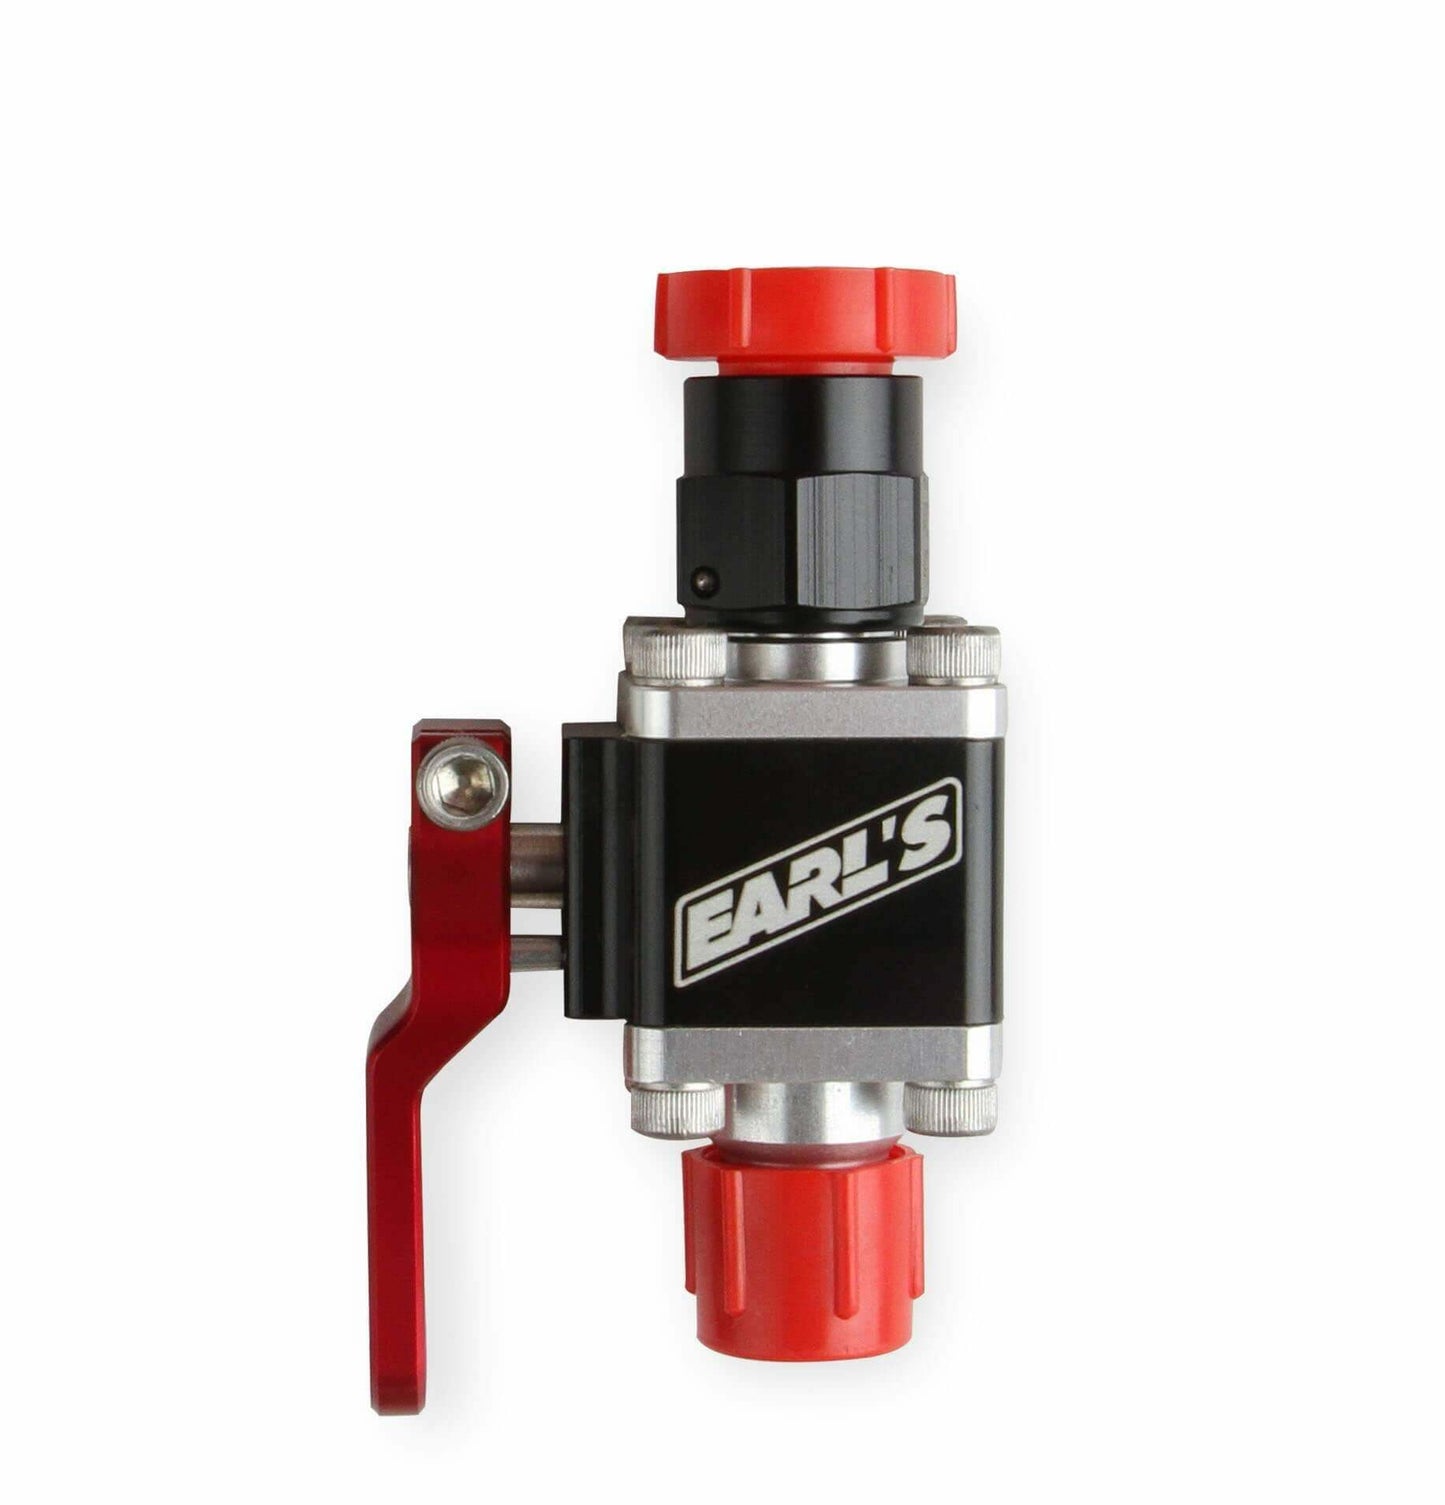 Earls UltraPro Ball Valve -8 AN Male to Female - 230708ERL